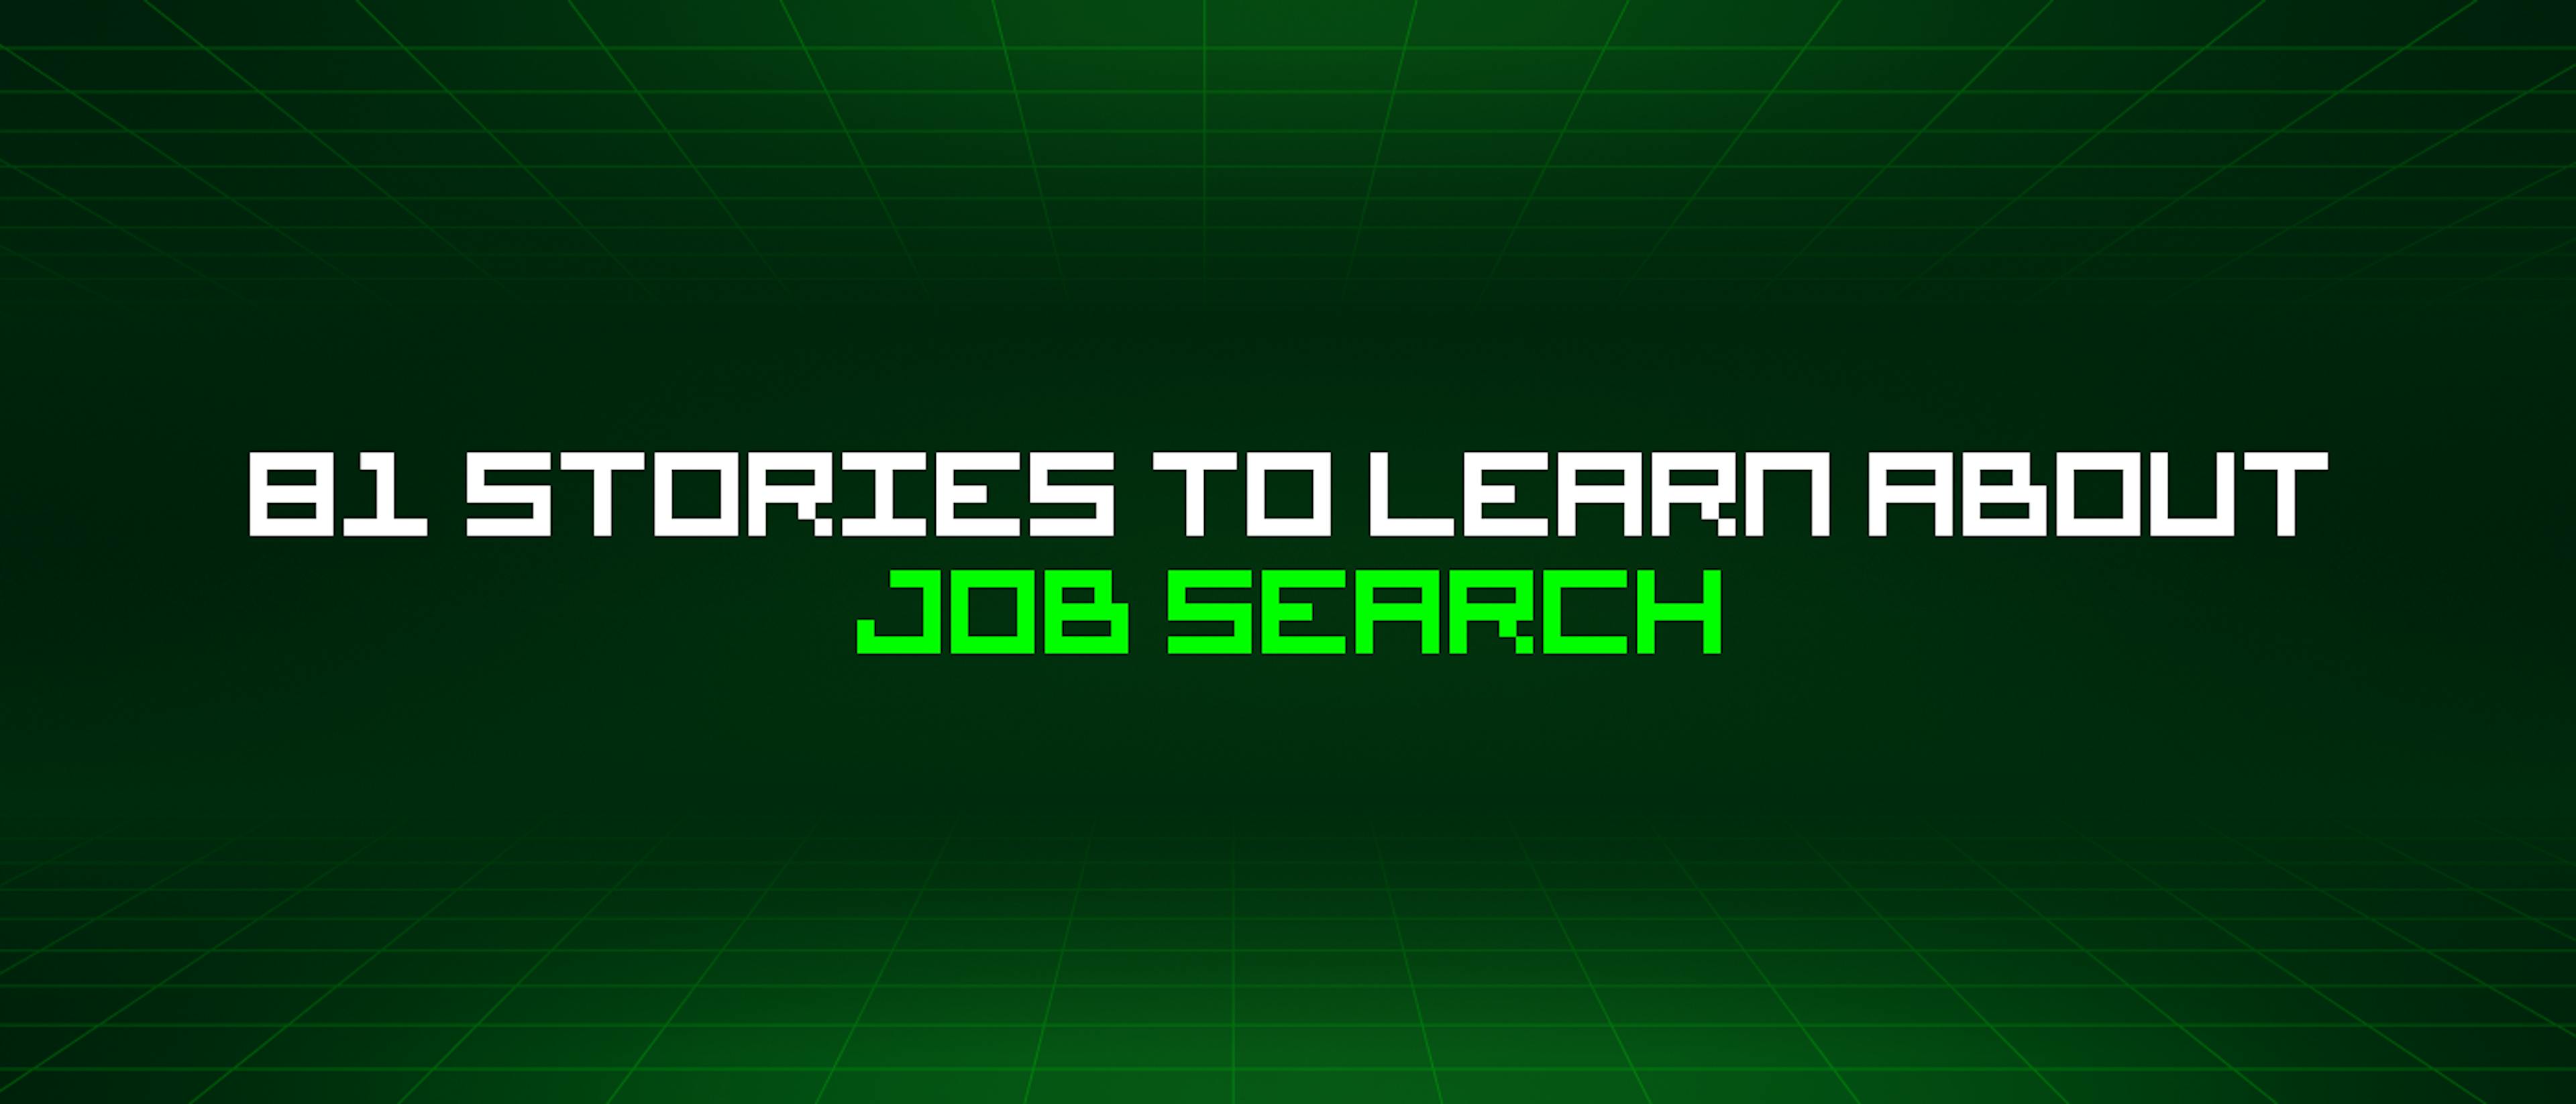 featured image - 81 Stories To Learn About Job Search